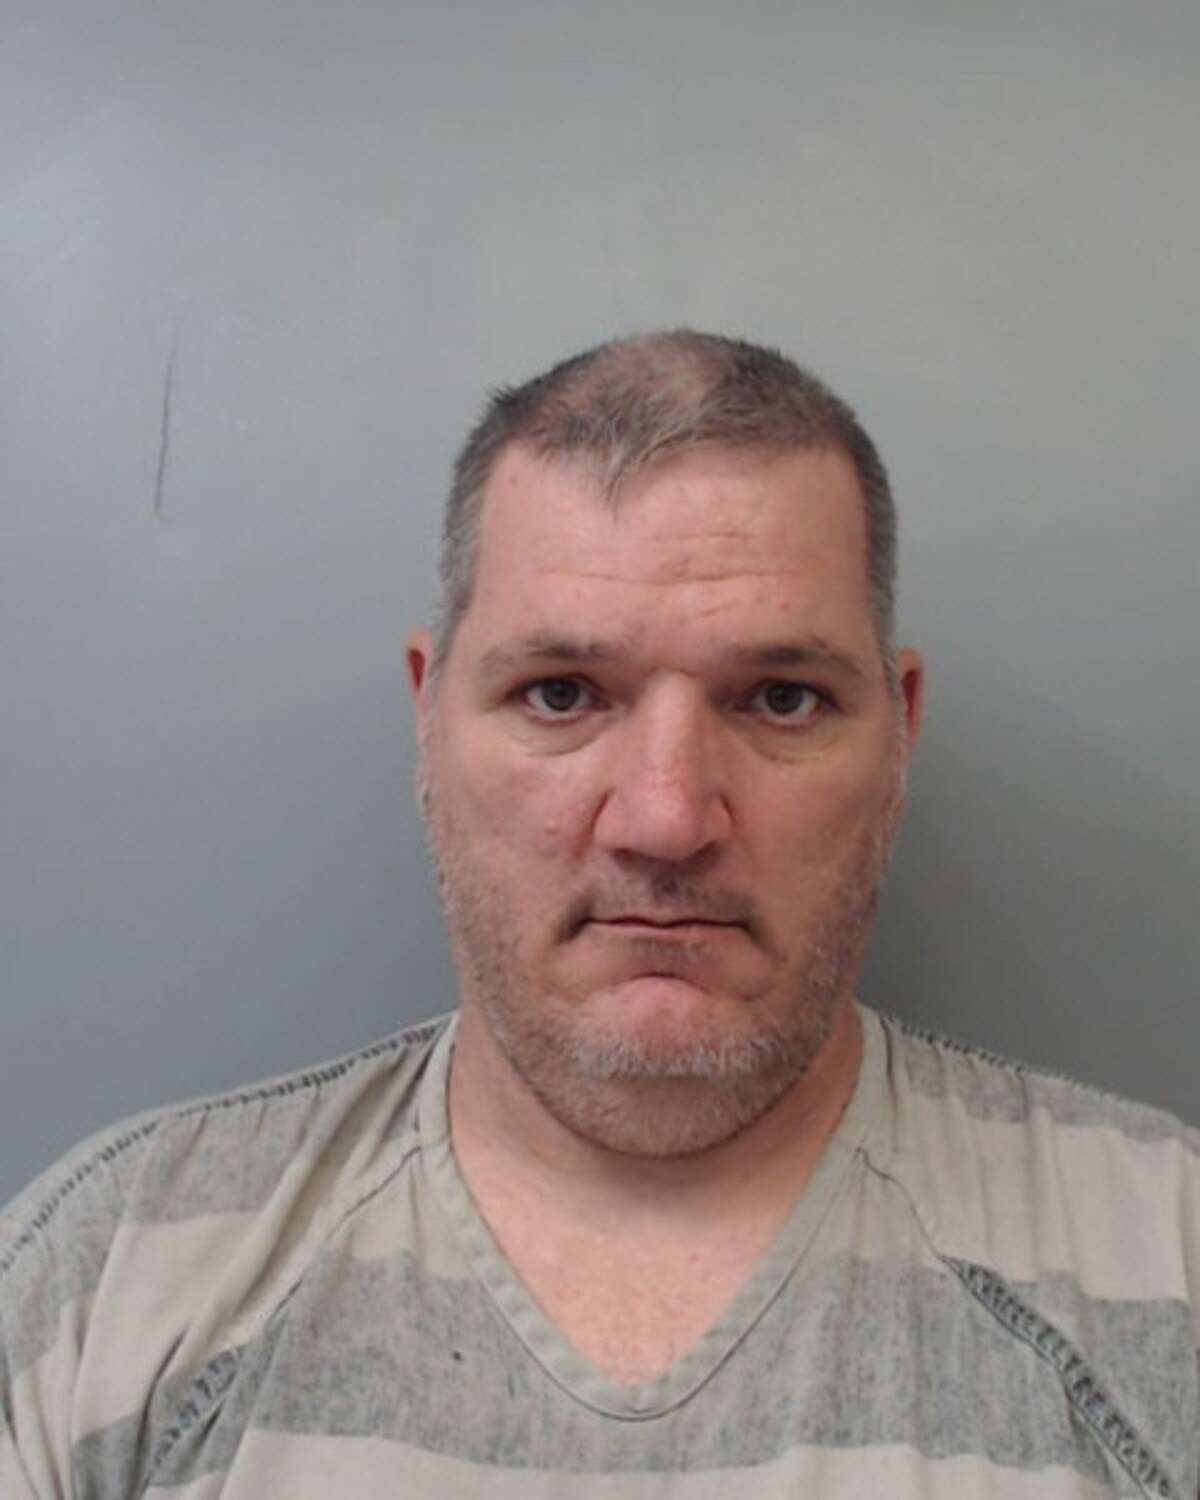 Daniel Eric Orchard, 48, was arrested and charged with assault.